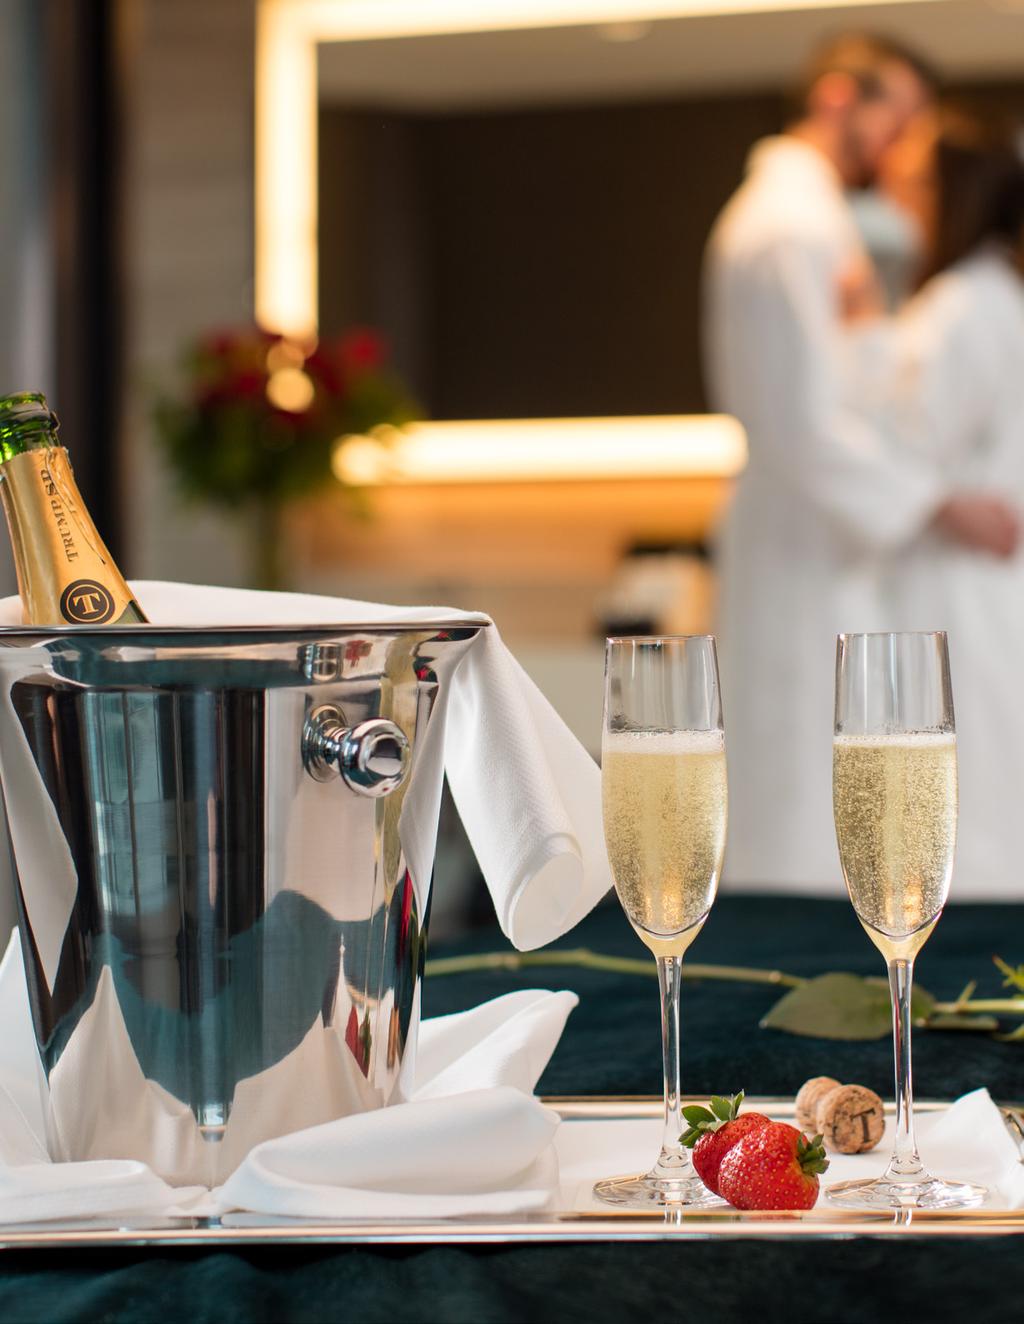 Take a Romantic Getaway Celebrate romance and create unforgettable memories to the moon and back with this heart-warming romance package - be pampered with the finest luxuries the city has to offer.